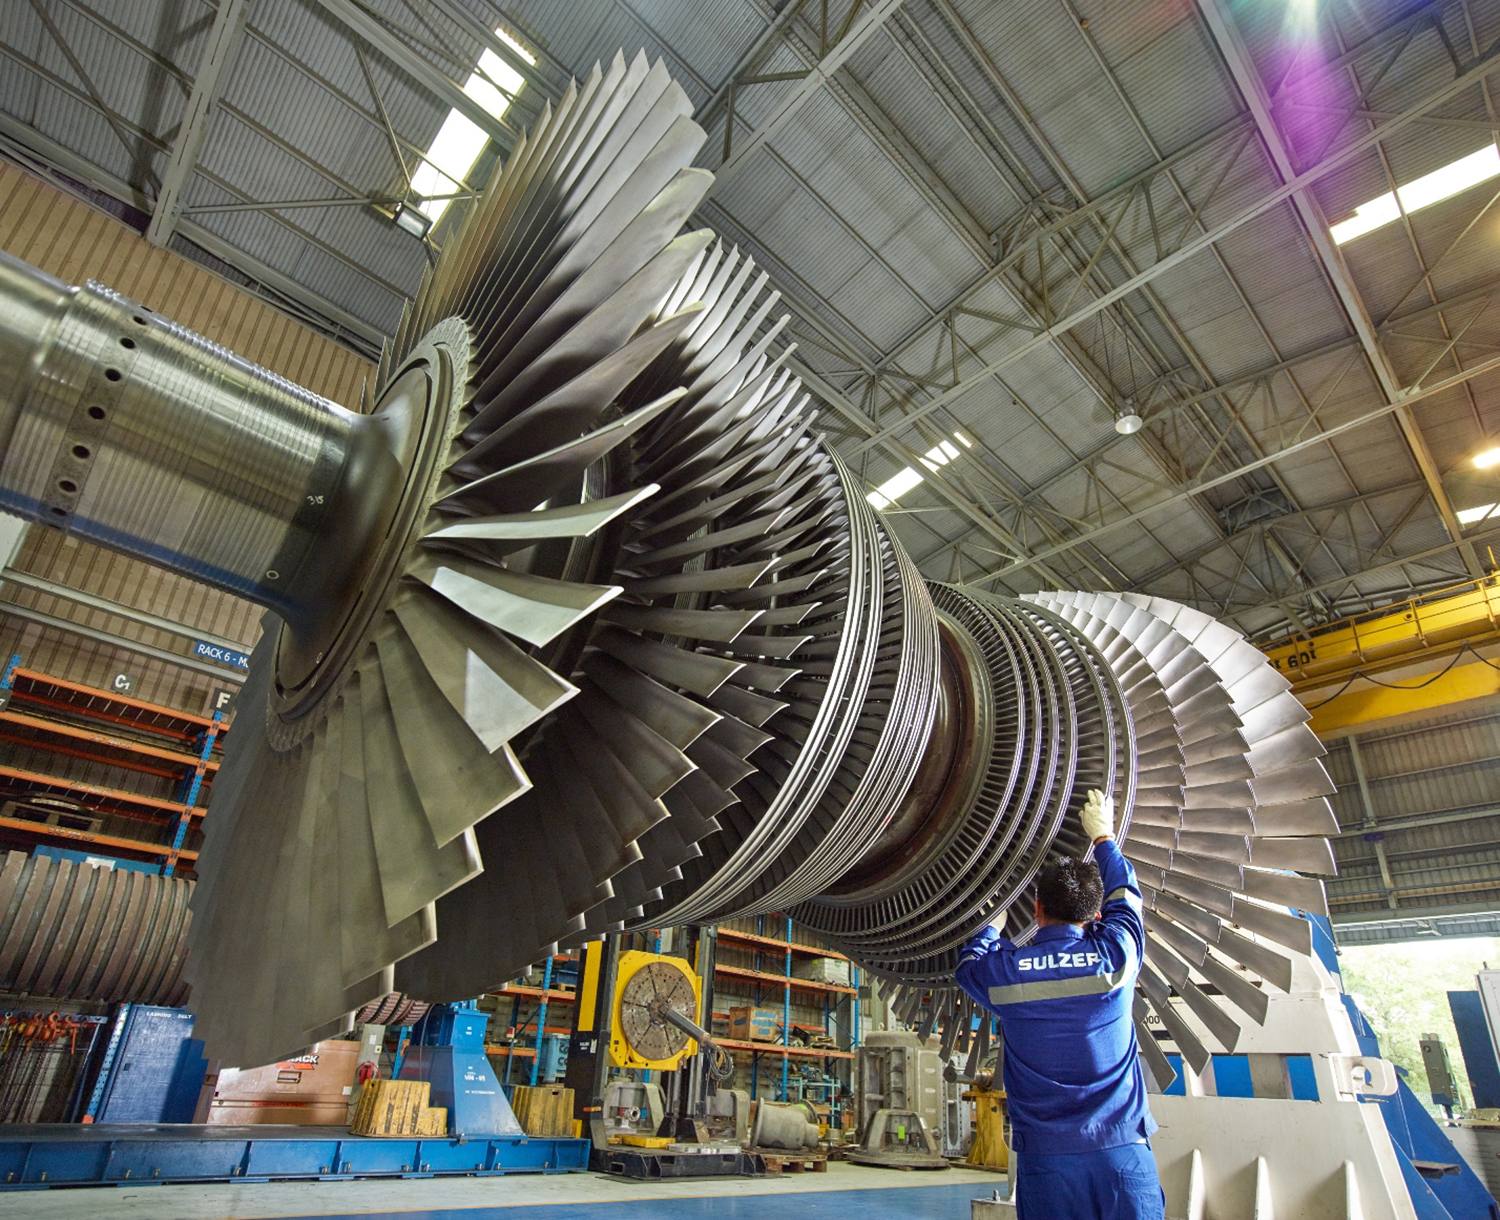 The business has successfully serviced over 1’500 steam and gas turbines, 400 plus compressors and more than 300 turbo generators in Asia.